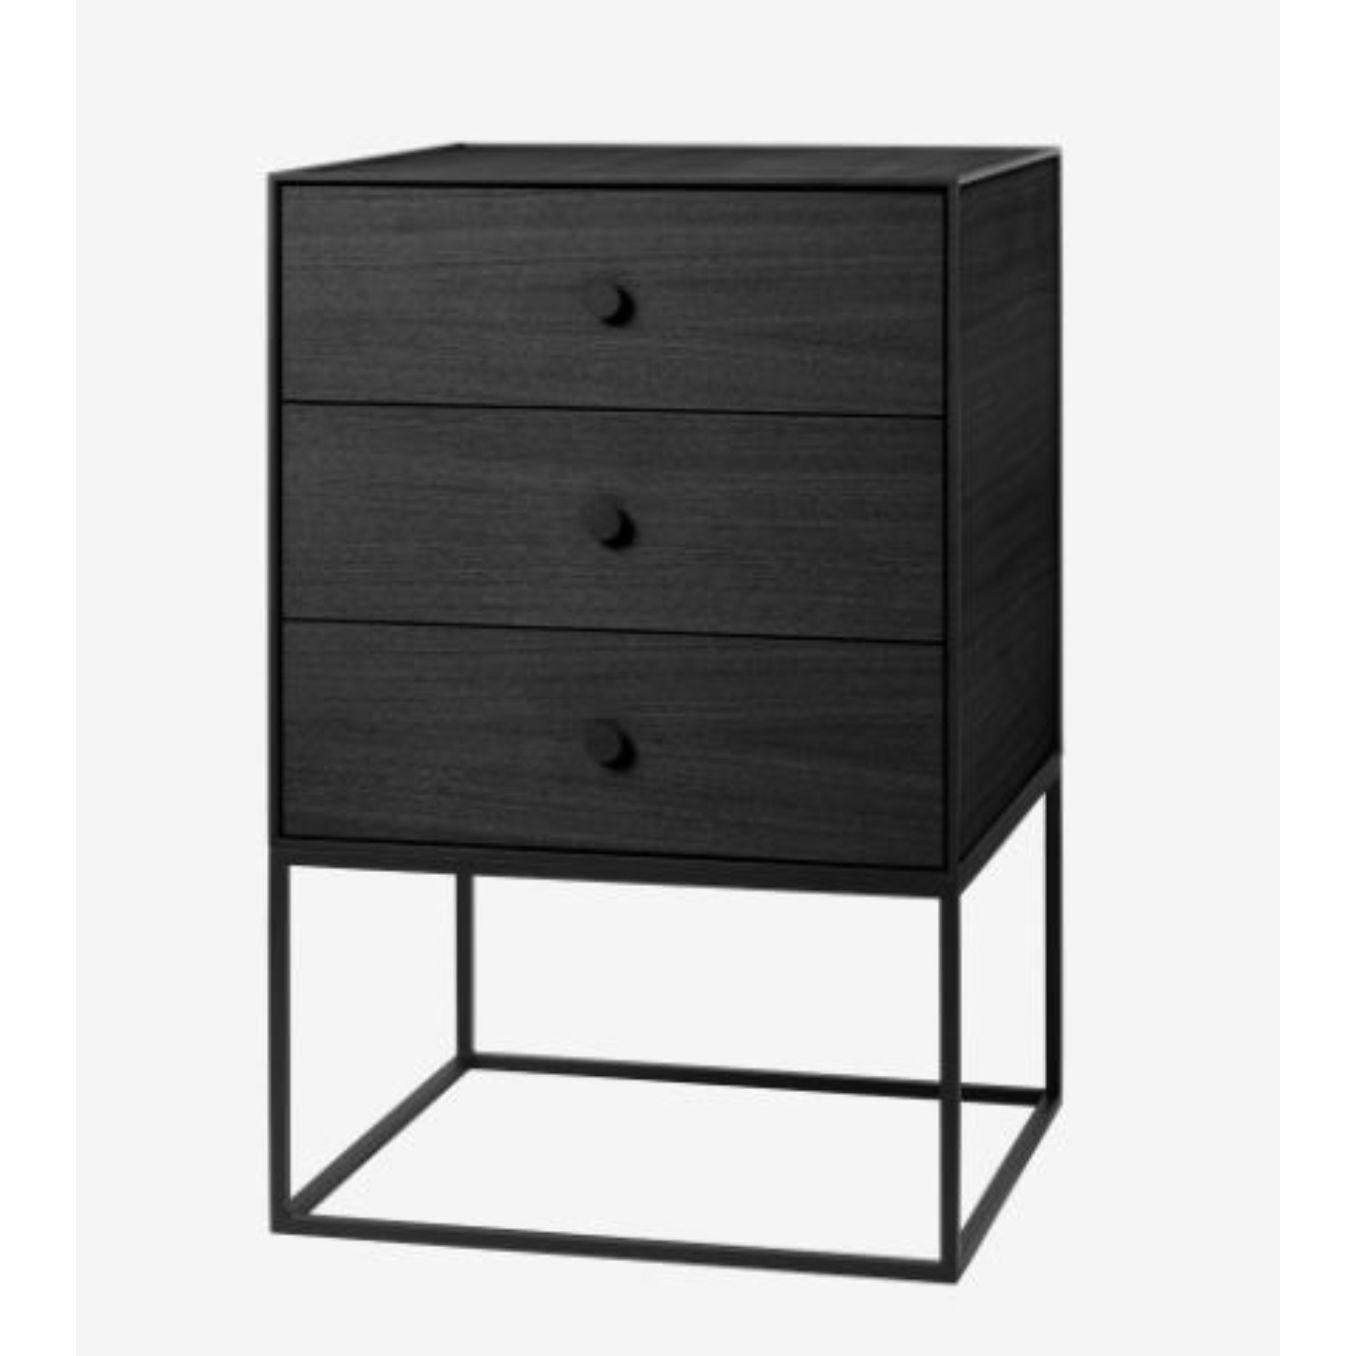 49 black ash frame sideboard with 3 drawers by Lassen
Dimensions: D 49 x W 42 x H 77 cm 
Materials: Finér, Melamin, Melamine, Metal, Veneer, ash
Also available in different colours and dimensions.
Weight: 21 Kg

By Lassen is a Danish design